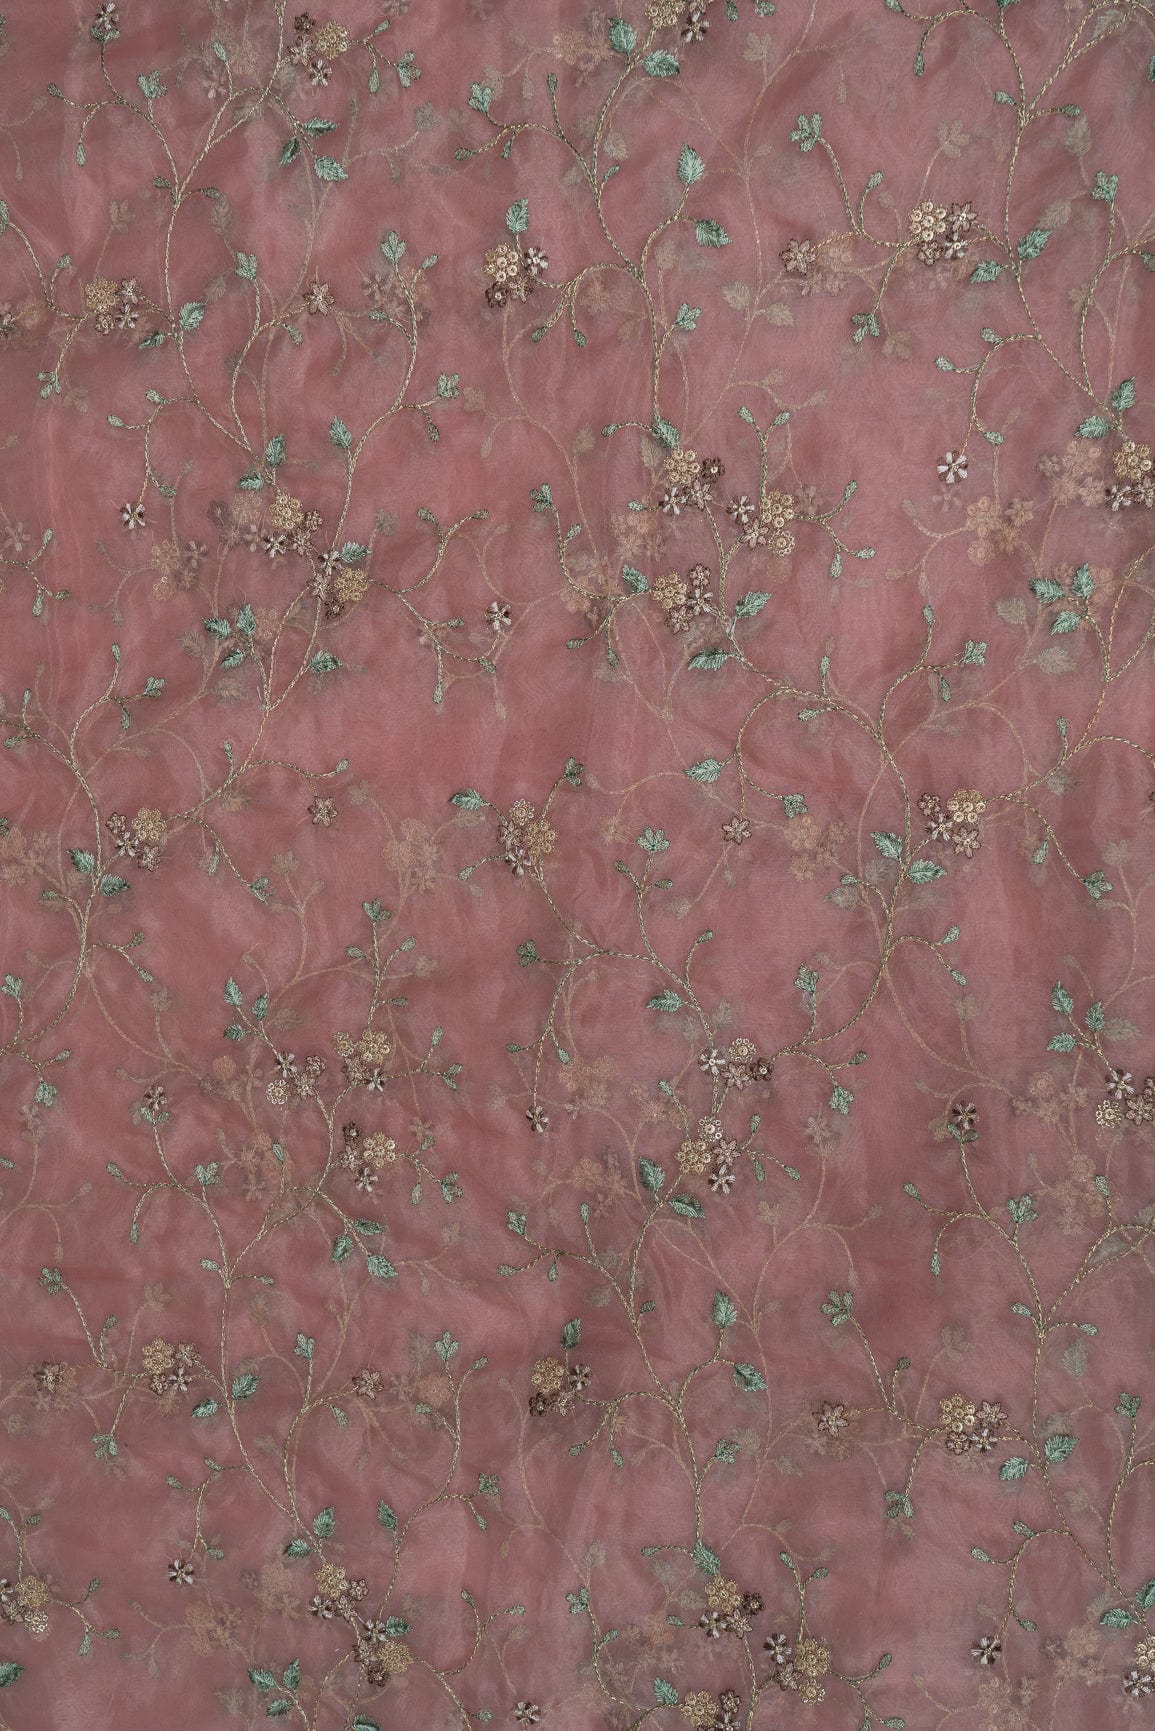 doeraa Multi Thread with Gold Sequins Embroidery On Salmon Pink Organza Fabric